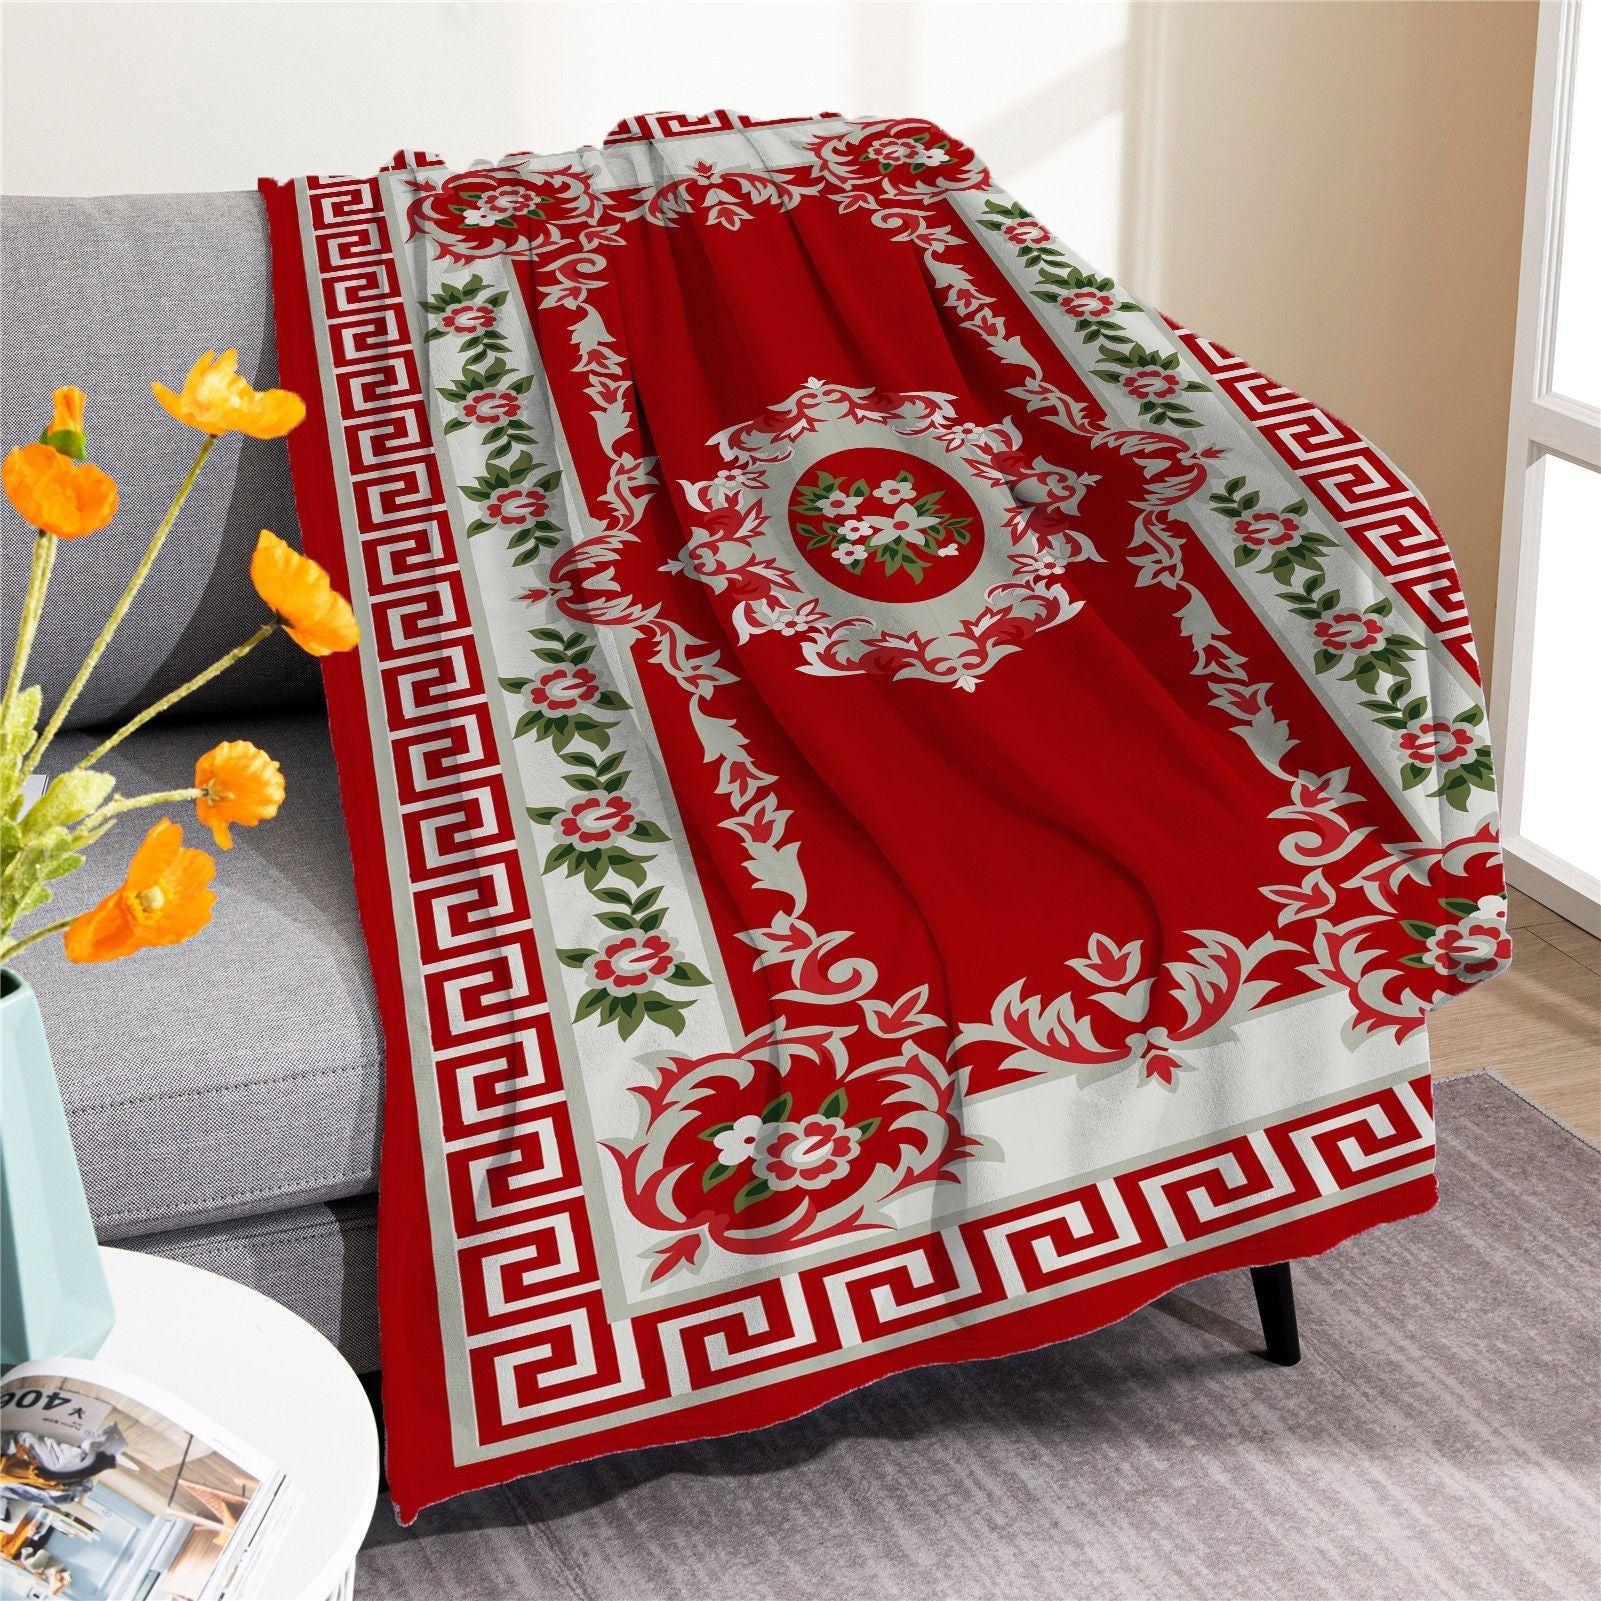 Vintage Boho Fleece Throw Blankets-Blankets-M20220701-22-50*60 Inches-Free Shipping at meselling99